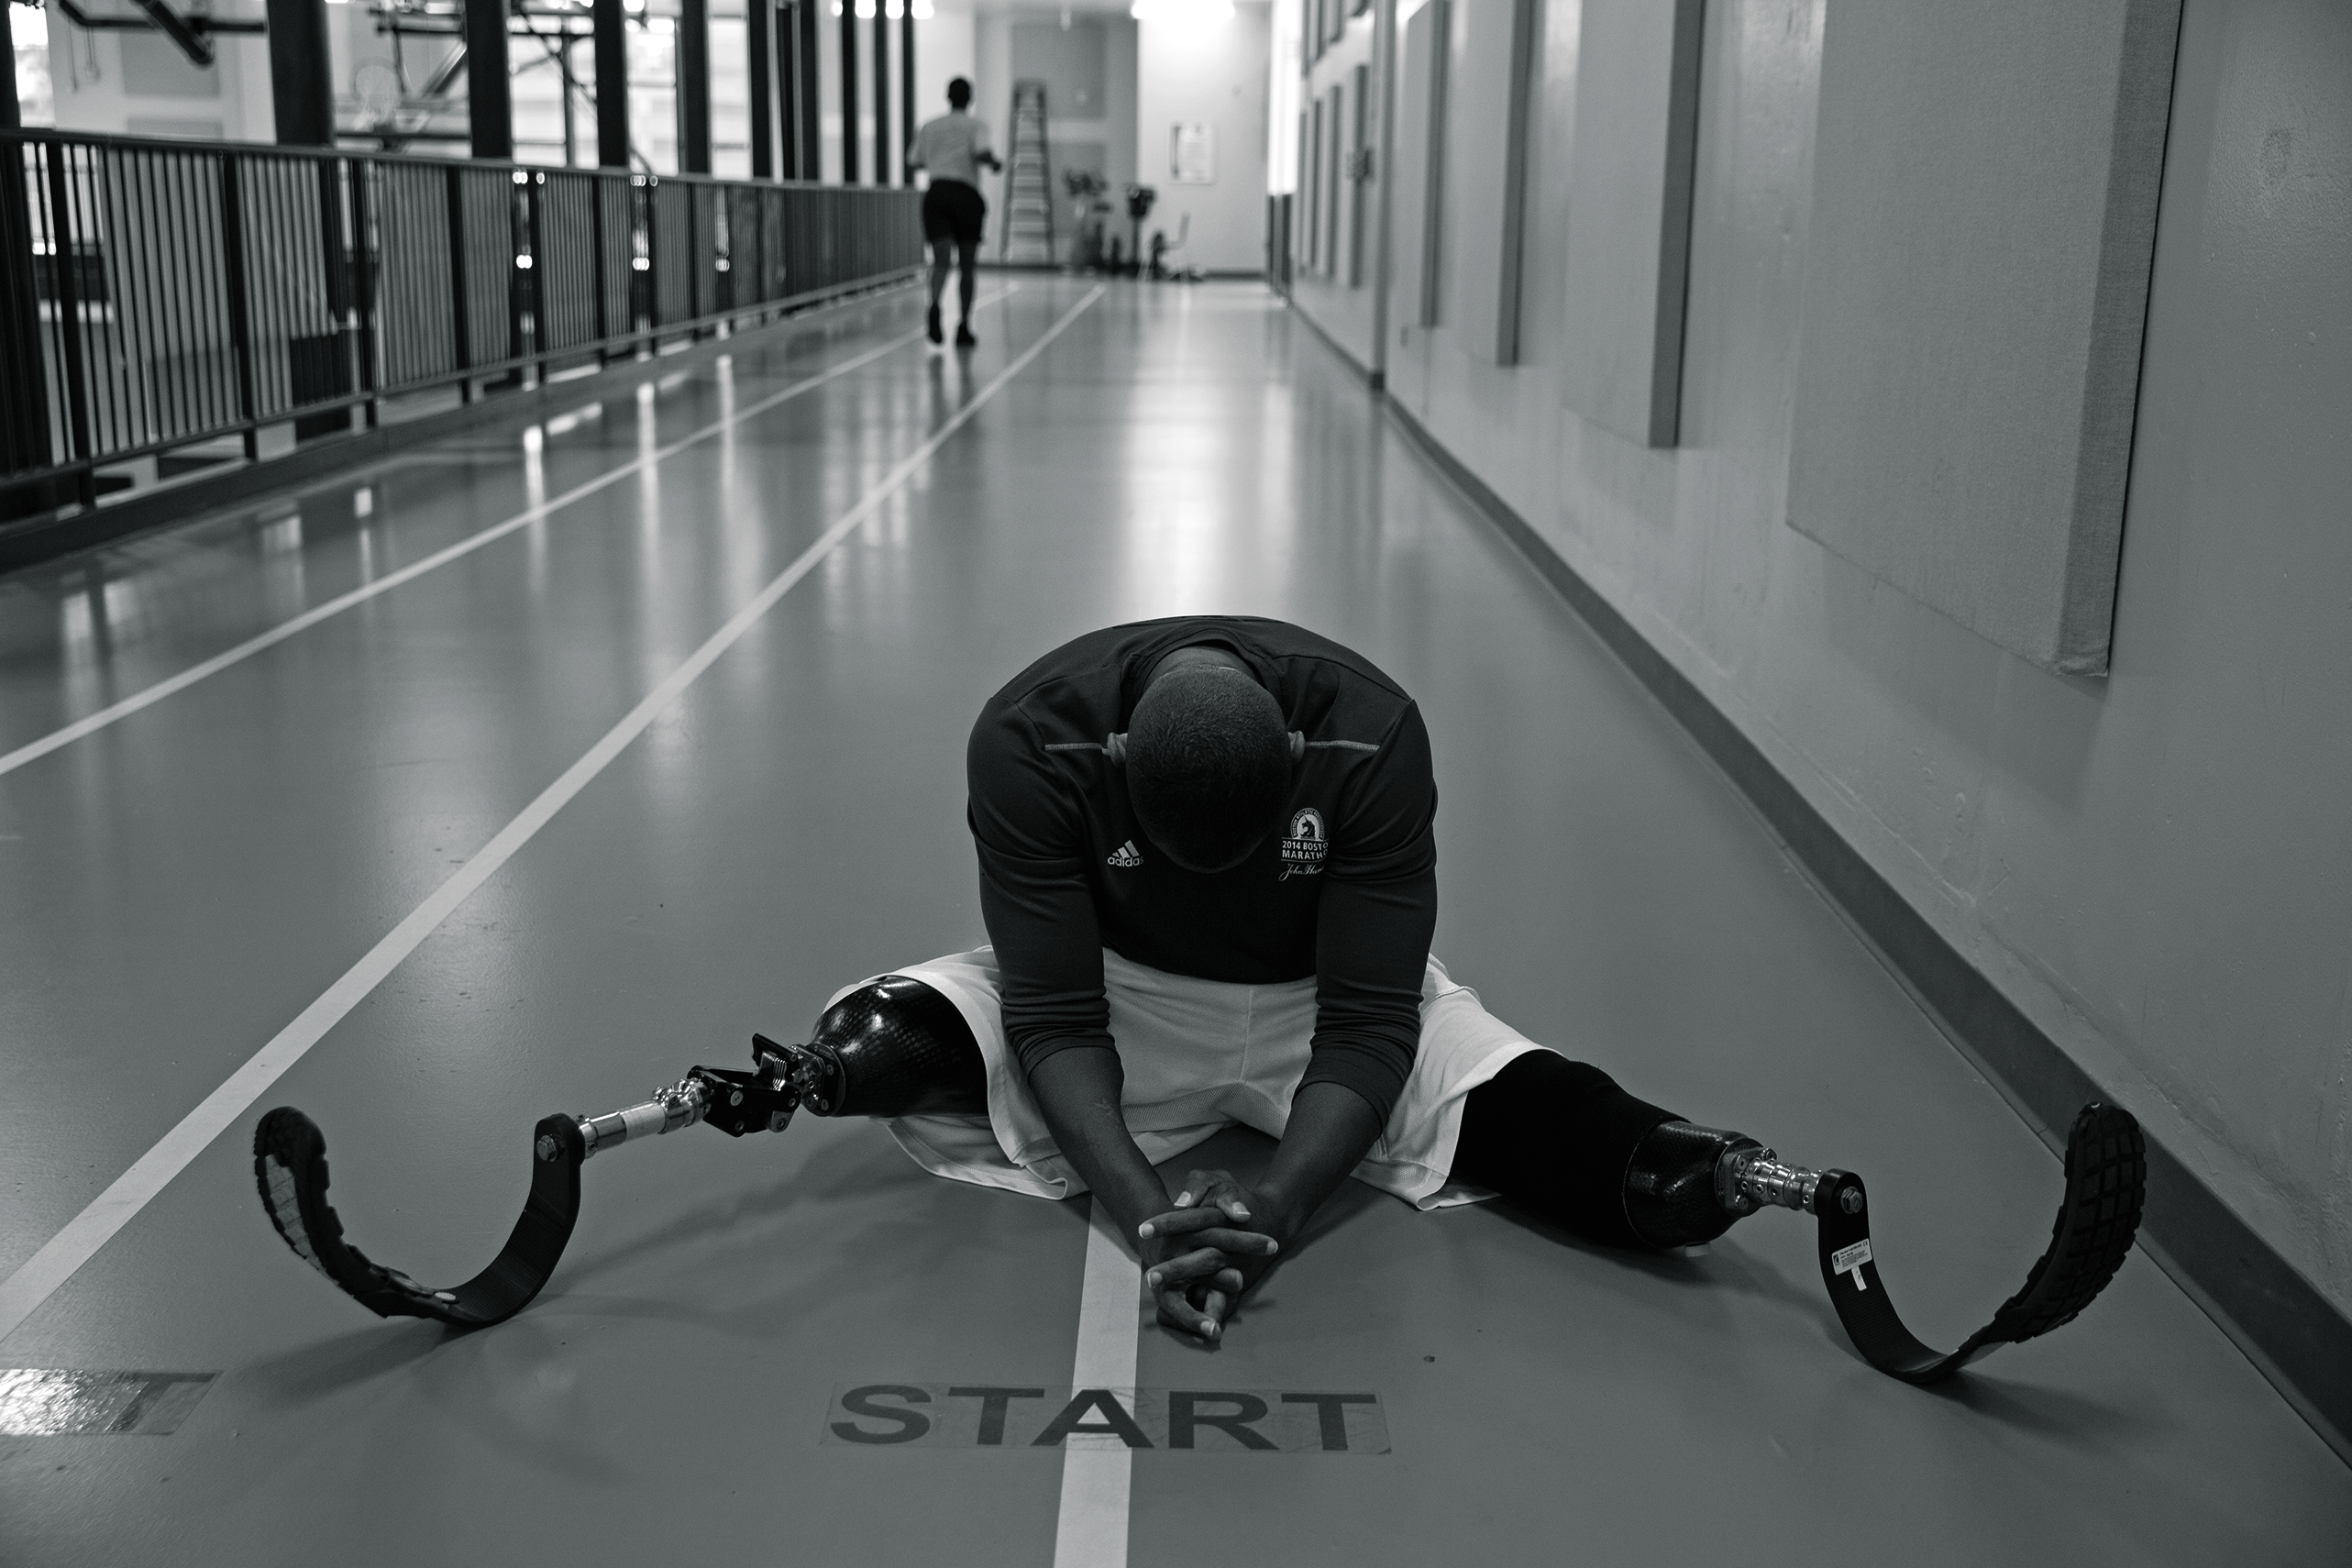 When King got prosthetic legs in November 2012, he says he was “discouraged” because he couldn’t walk for more than 10 minutes at a time. But after five months of practice, he graduated to running blades. King took his first jog at one of Walter Reed’s indoor tracks, below, while watching coverage of the Boston Marathon bombing. He vowed to run it next year.